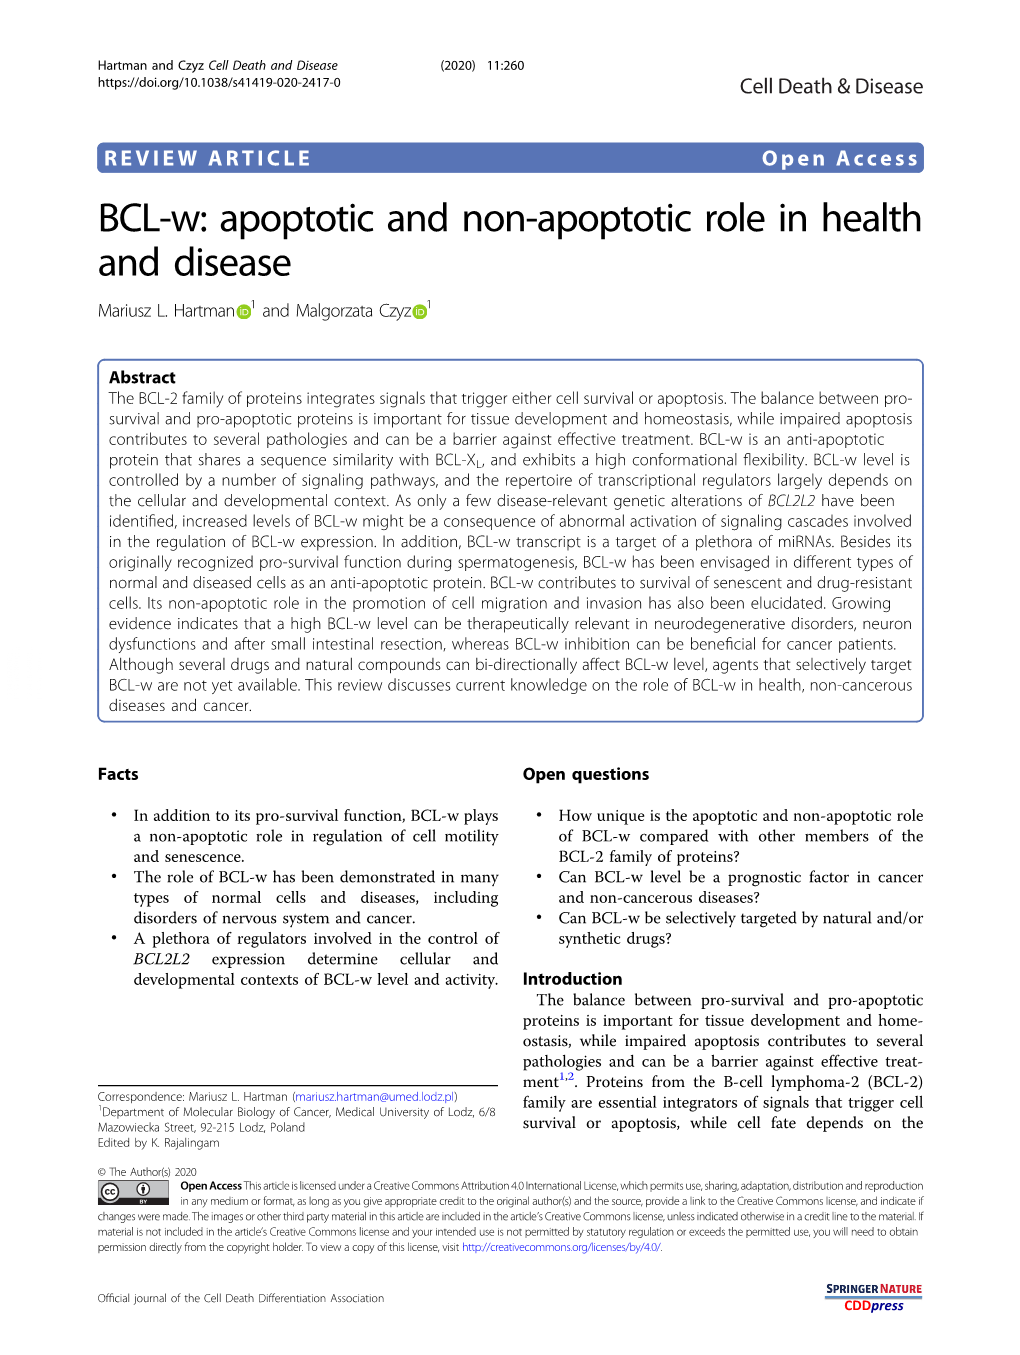 BCL-W: Apoptotic and Non-Apoptotic Role in Health and Disease Mariusz L